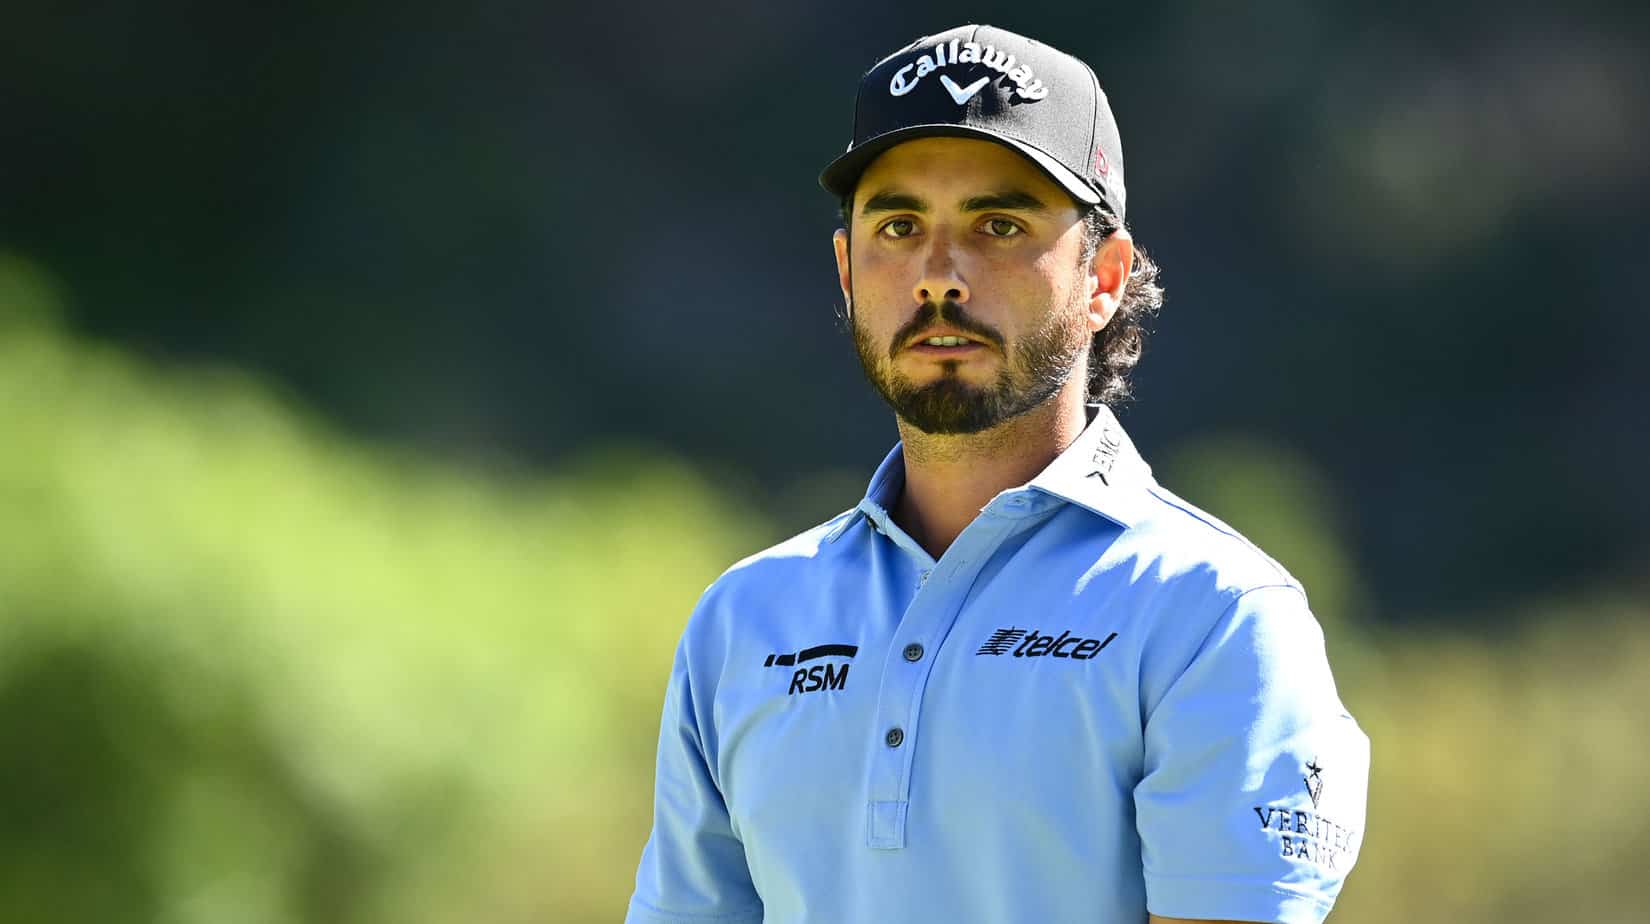 2023 Masters at Augusta National: the Mexican Golfer To Watch